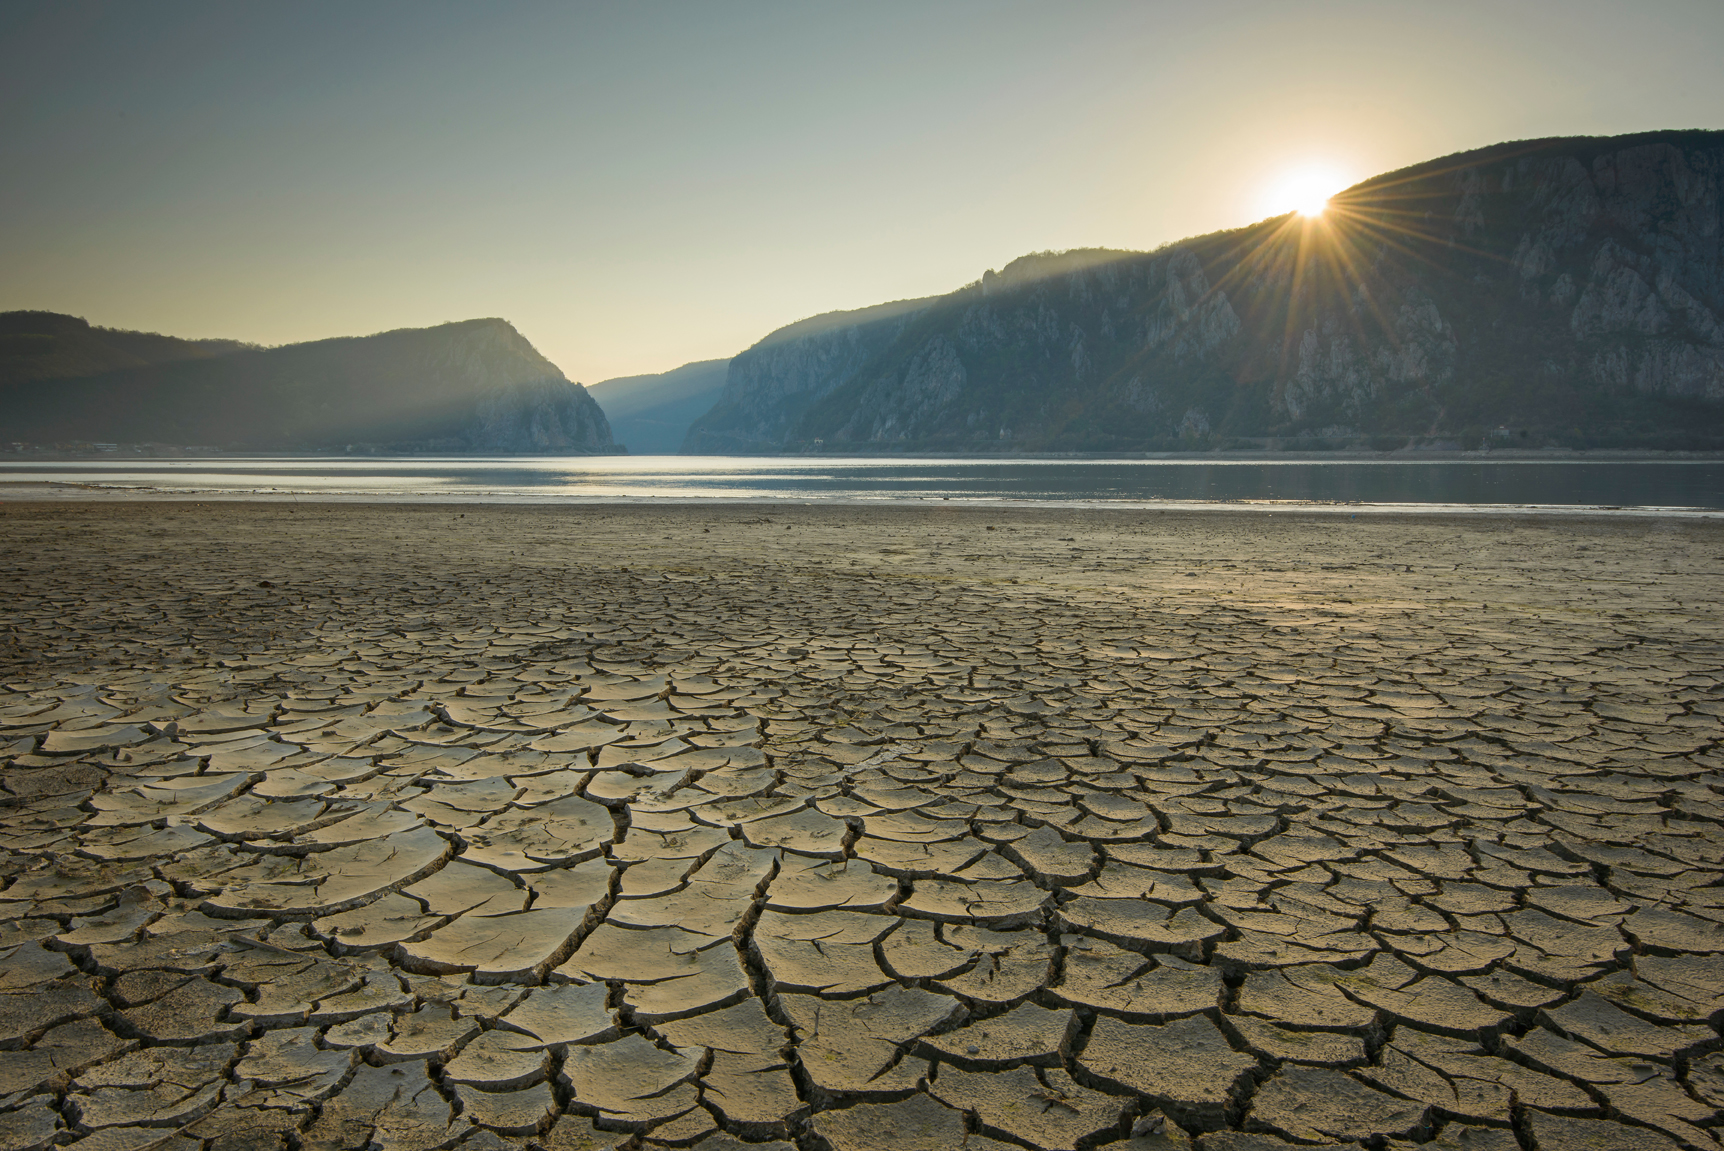 Wild World: Cracked and dry riverbed extending into the distance ending at the Danube River and mountains in the background and the sun just showing above them in Eastern Europe.